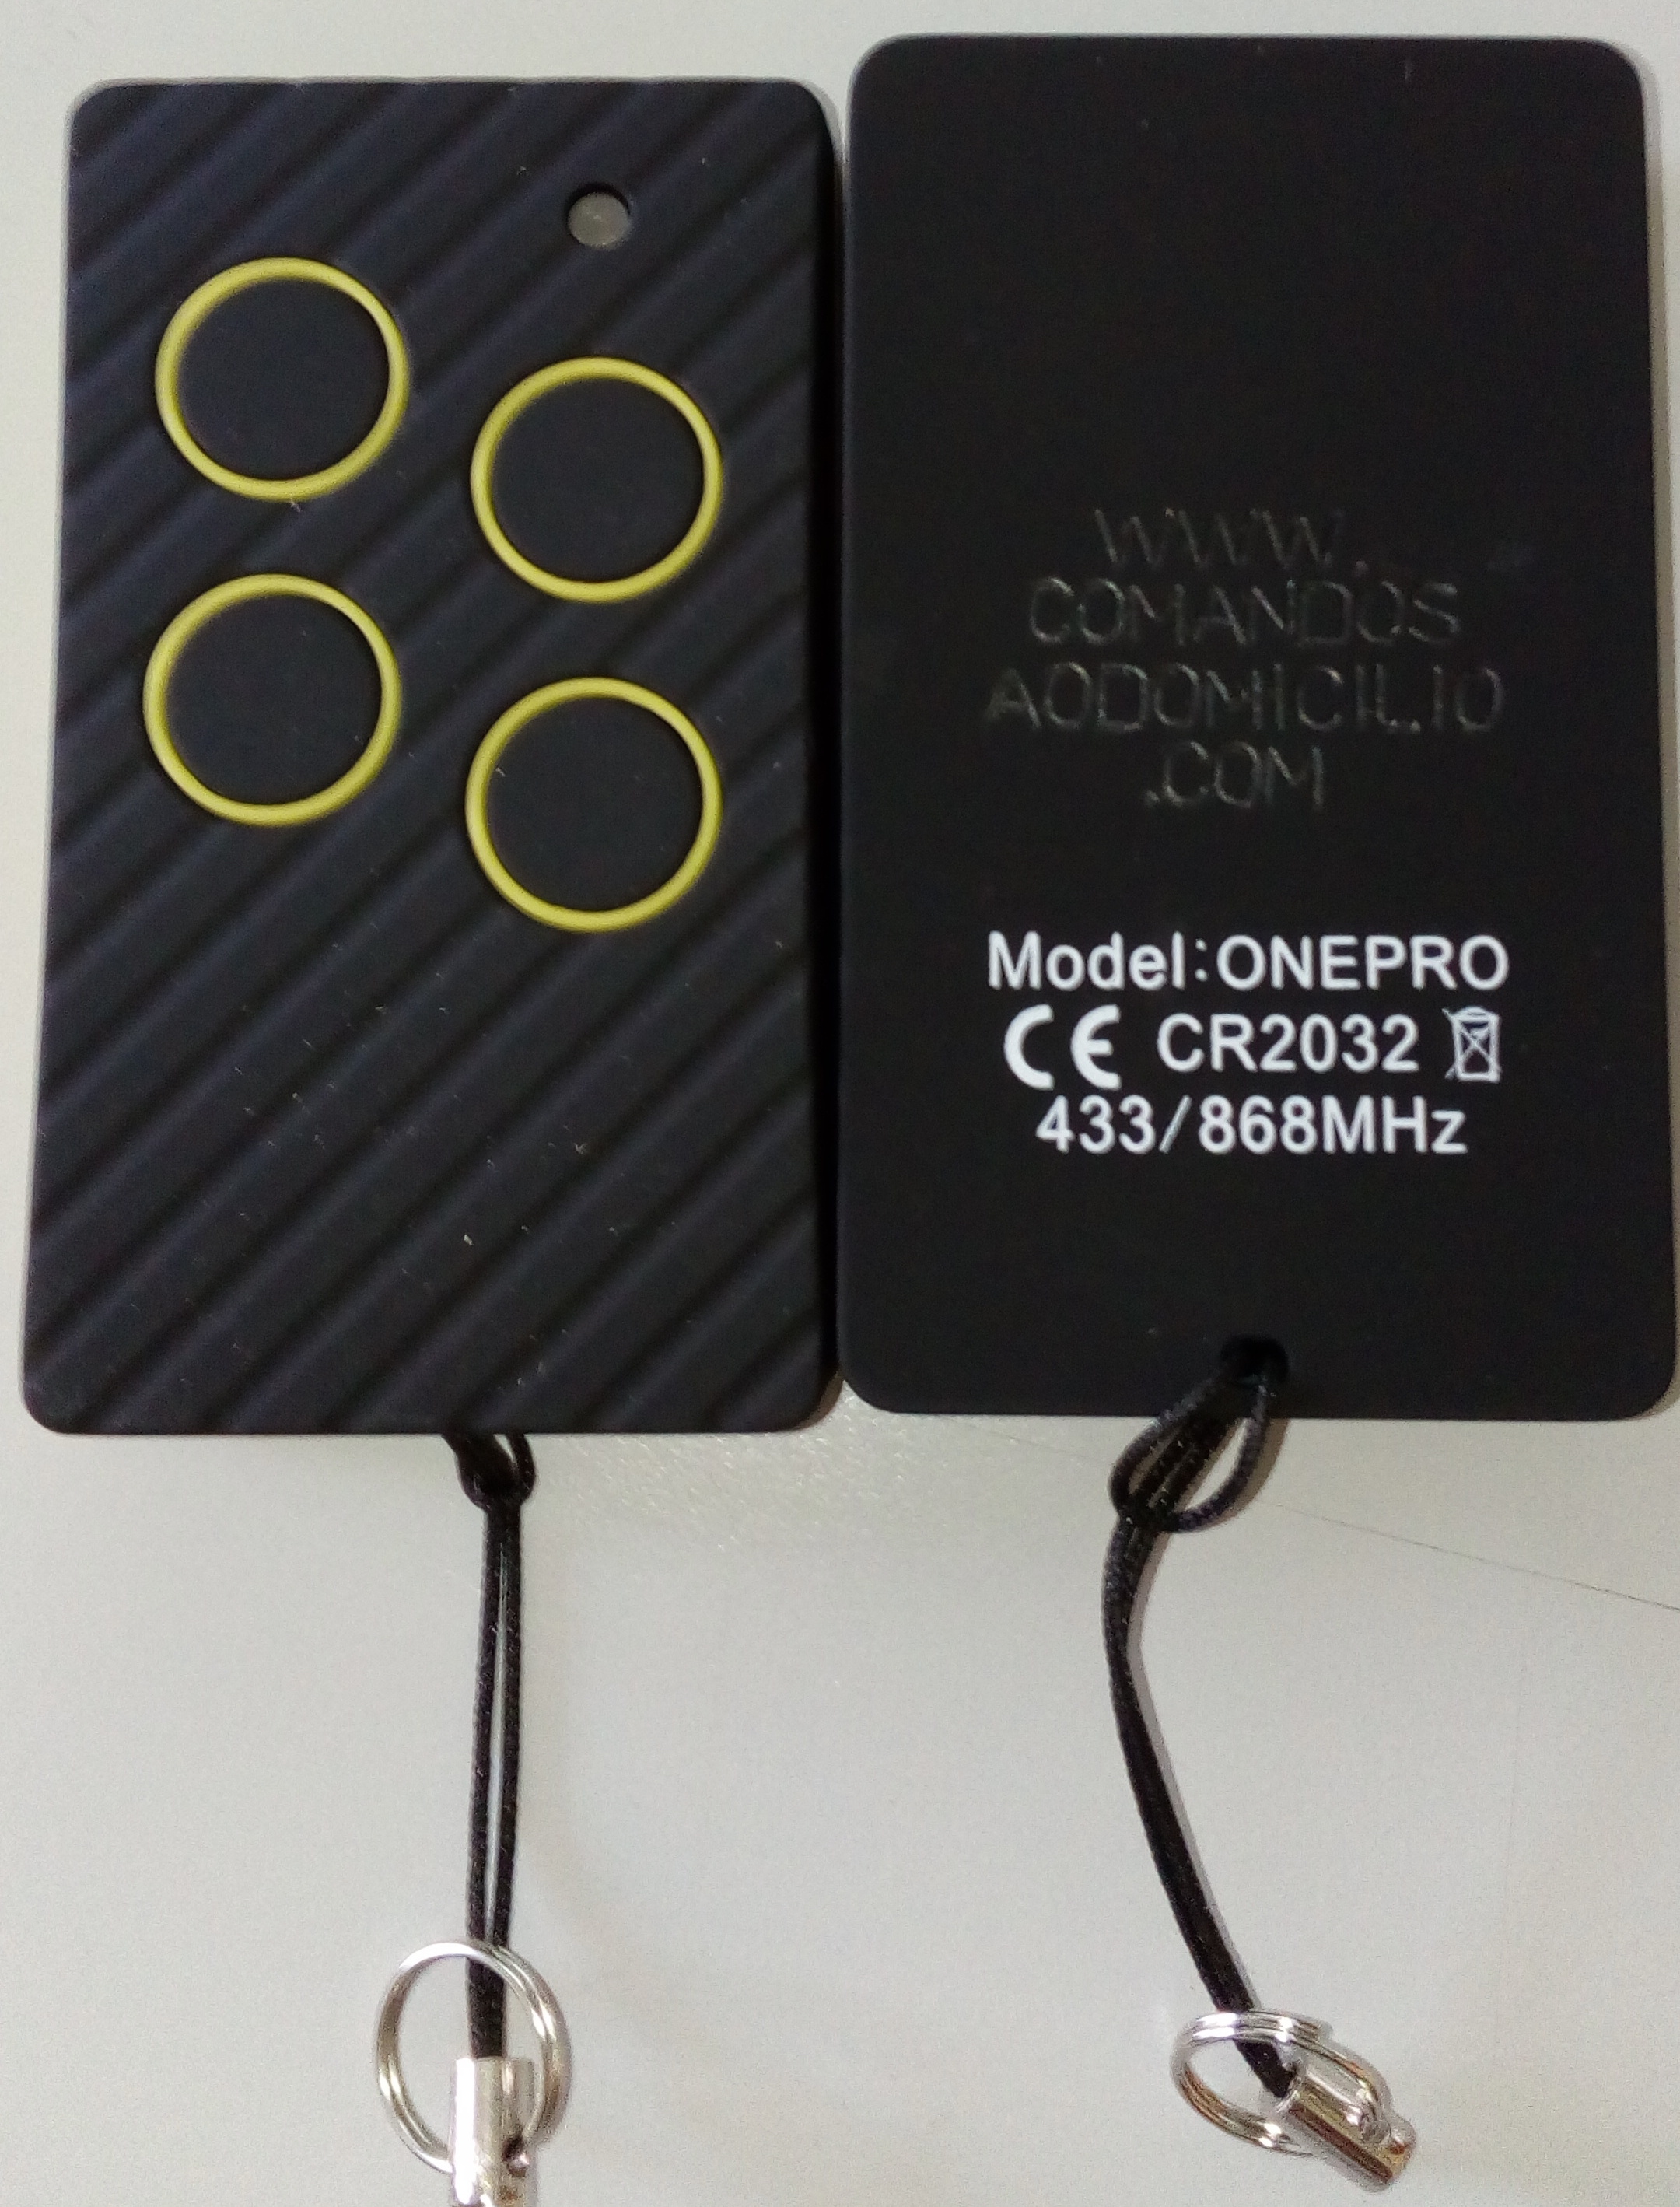 ONEPRO - BFT rolling code 433Mhz